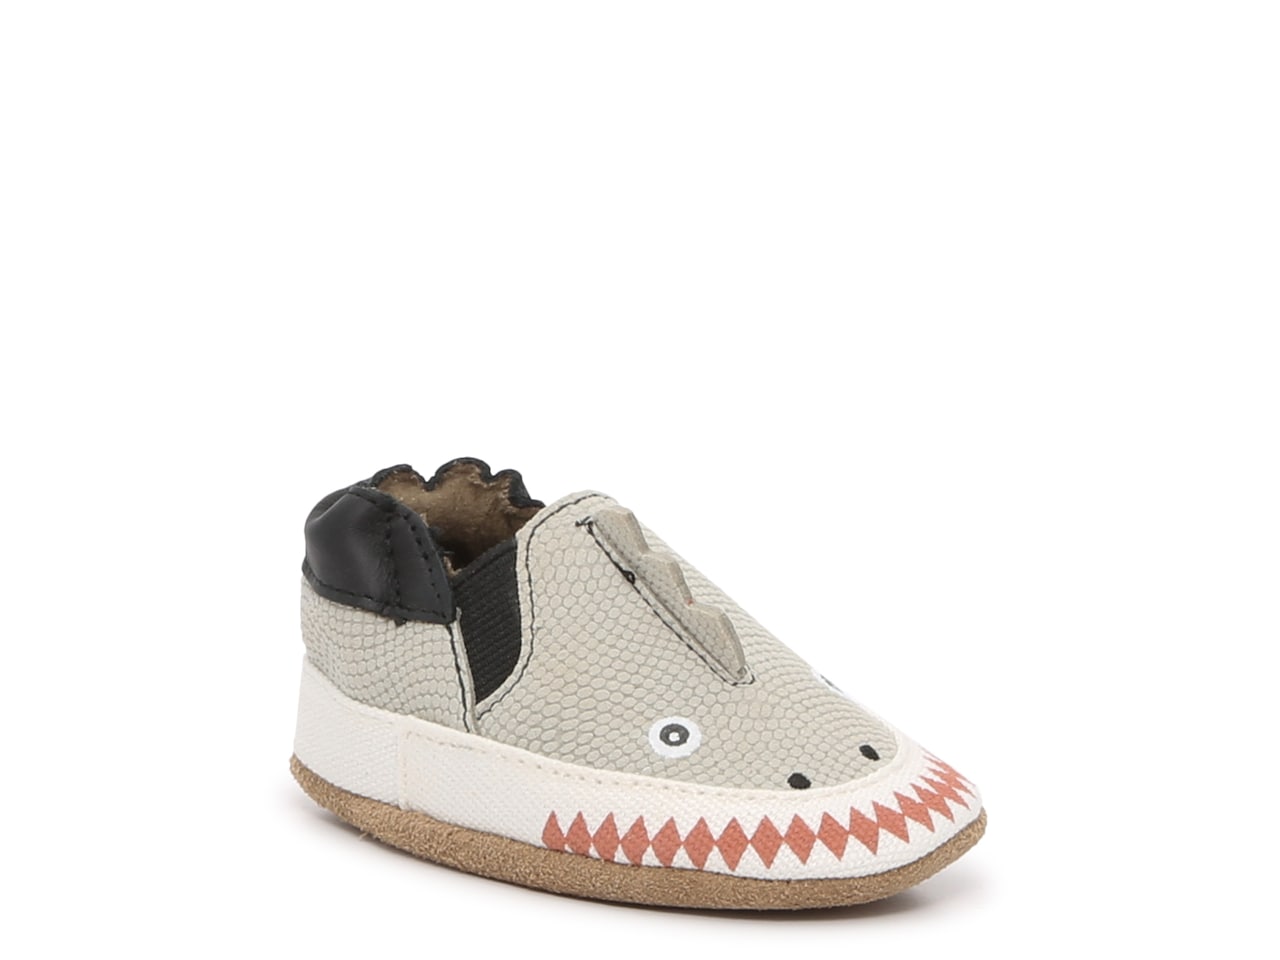 Robeez Baby Leather Shoes: Dino Dan (Grey) or Special Occasion (White) $11.24 + Free Shipping